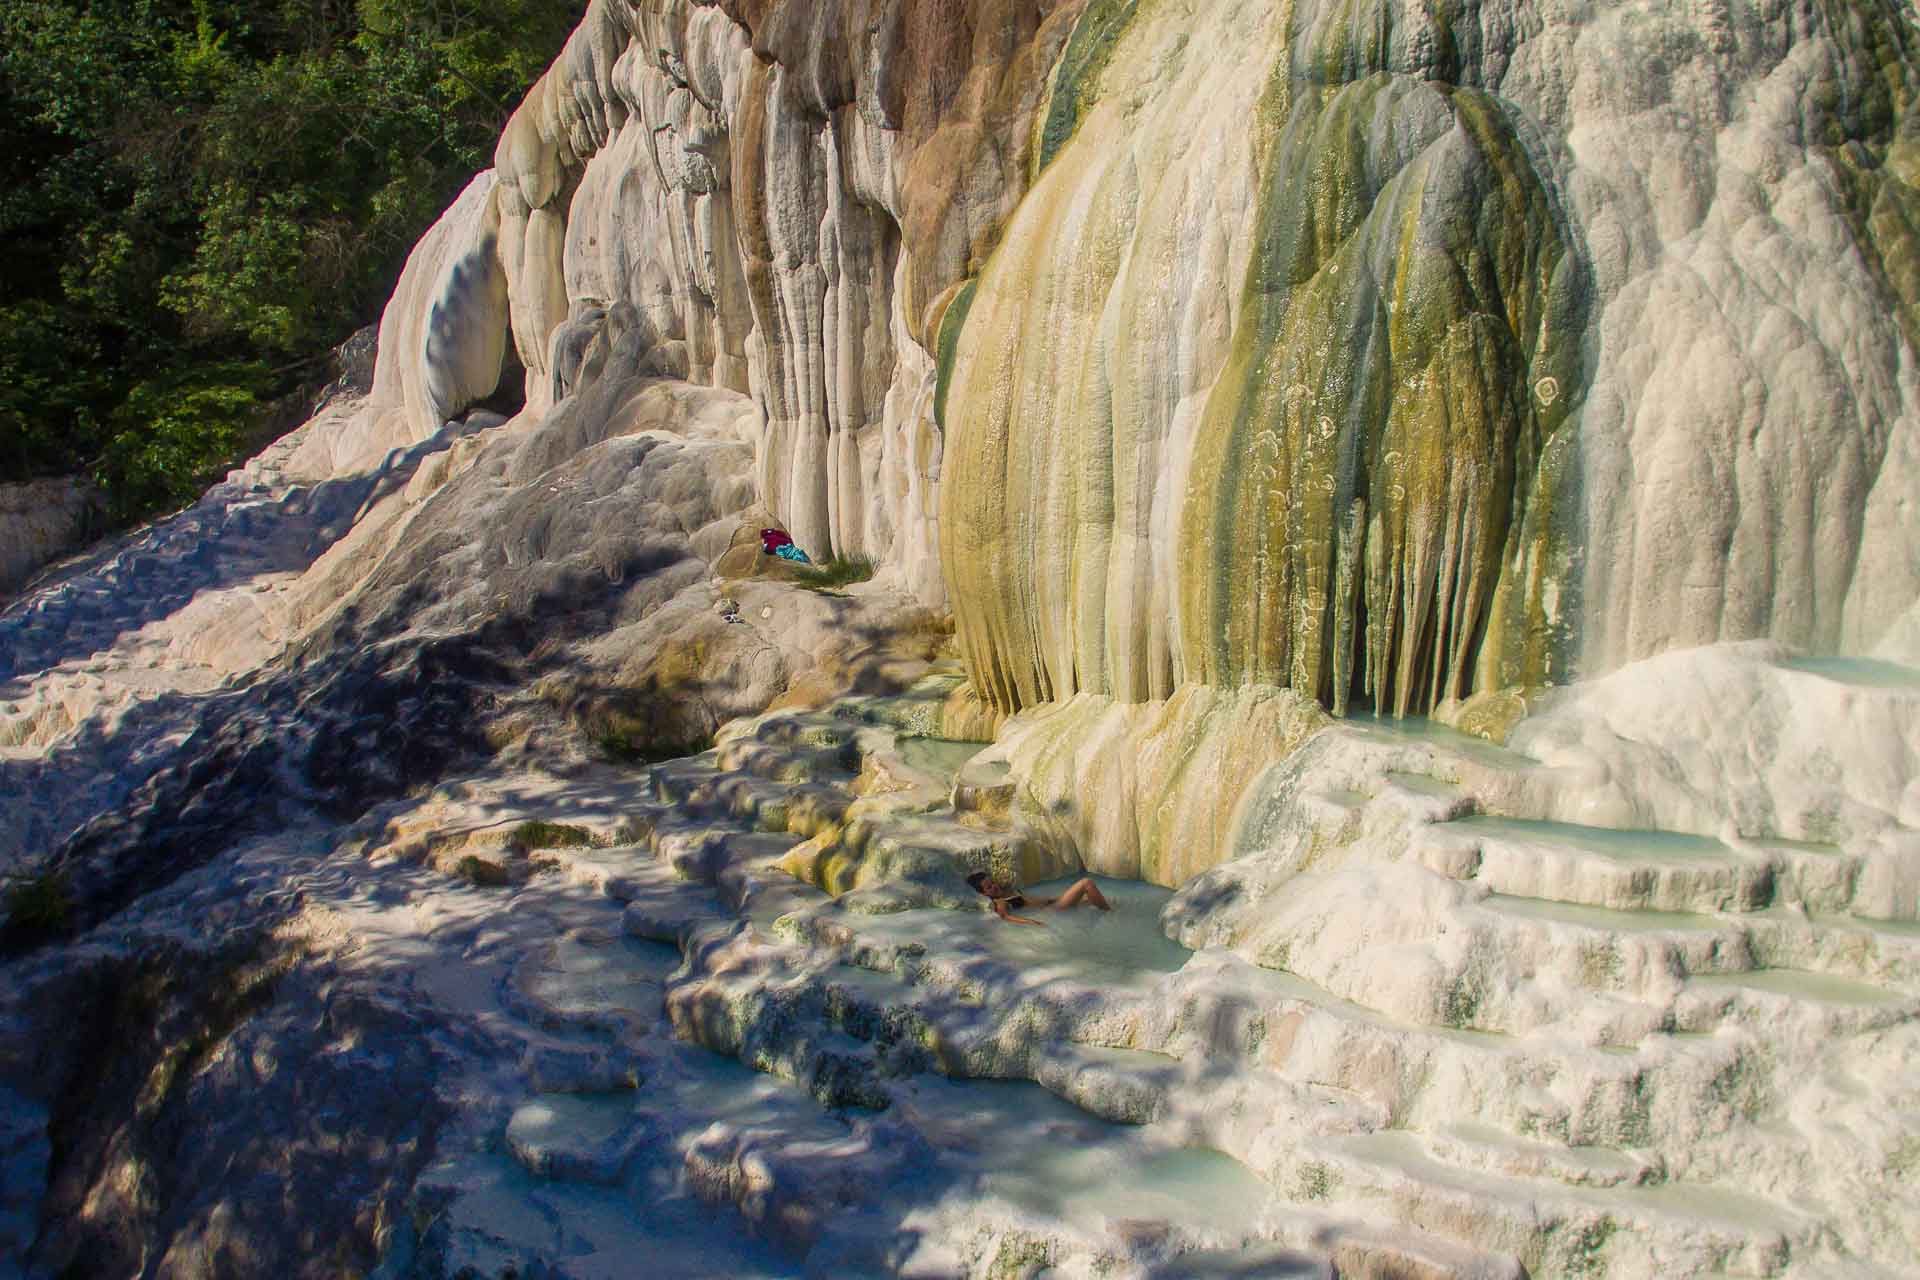 a large white rock with pools of green water where Fernanda is in one of them